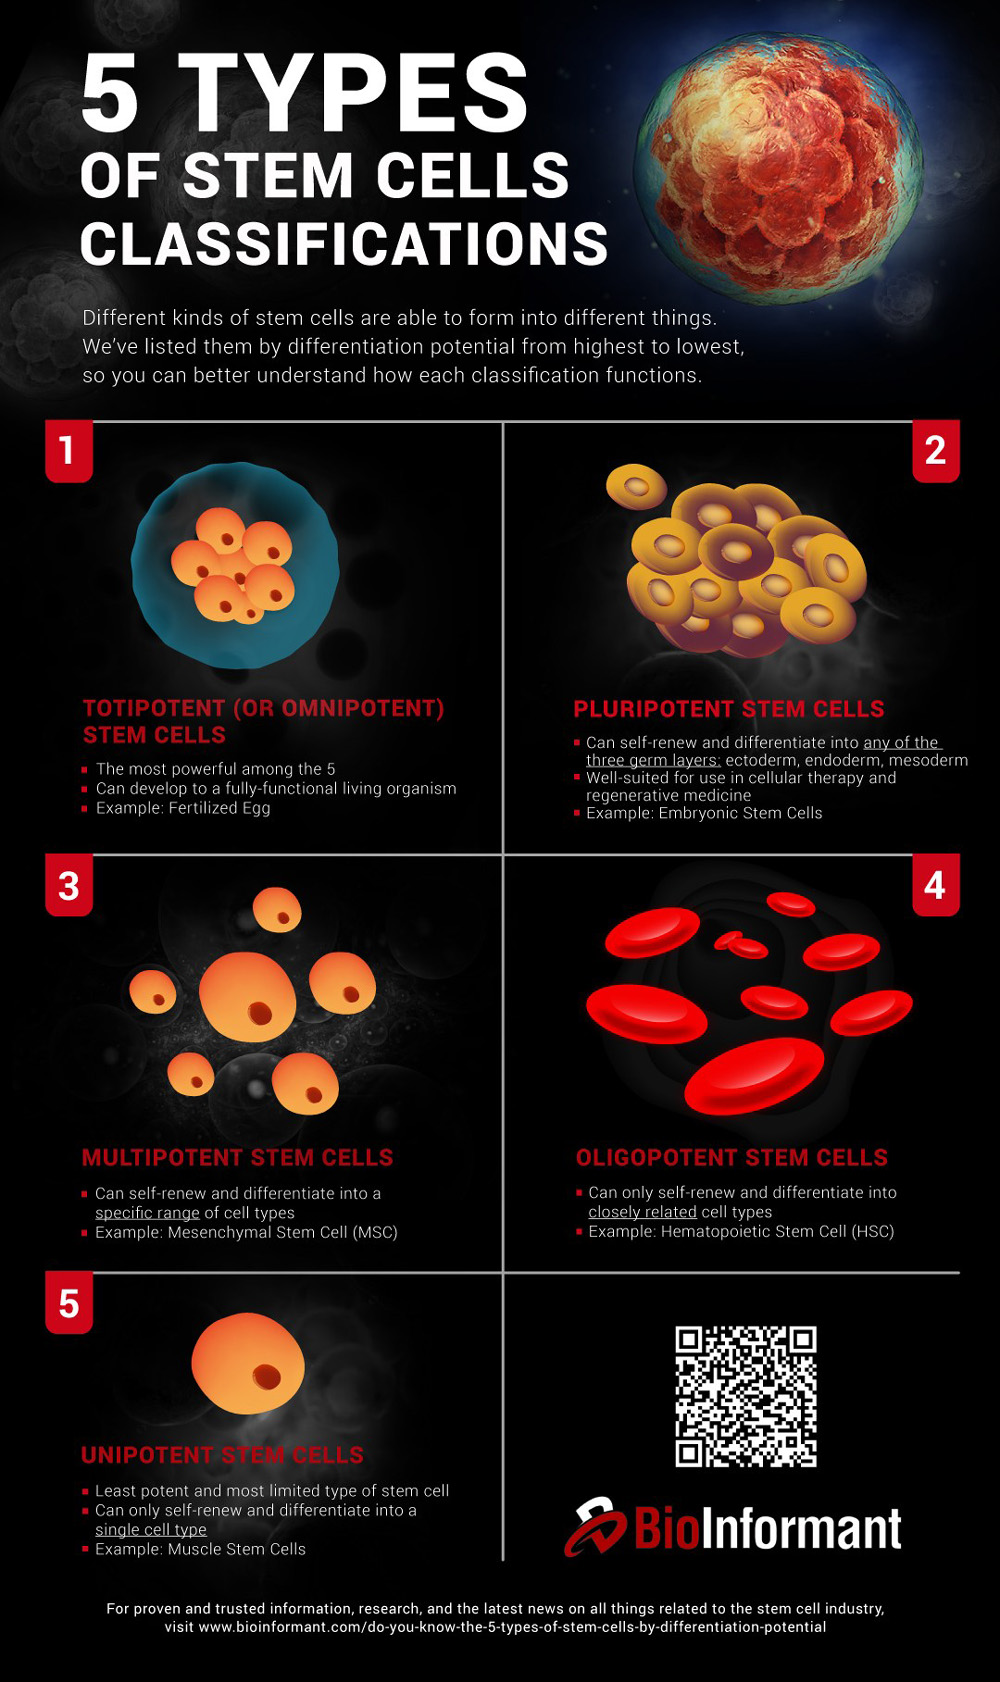 Different Types of Stem Cells | Do You Know The 5 Types Of Stem Cells